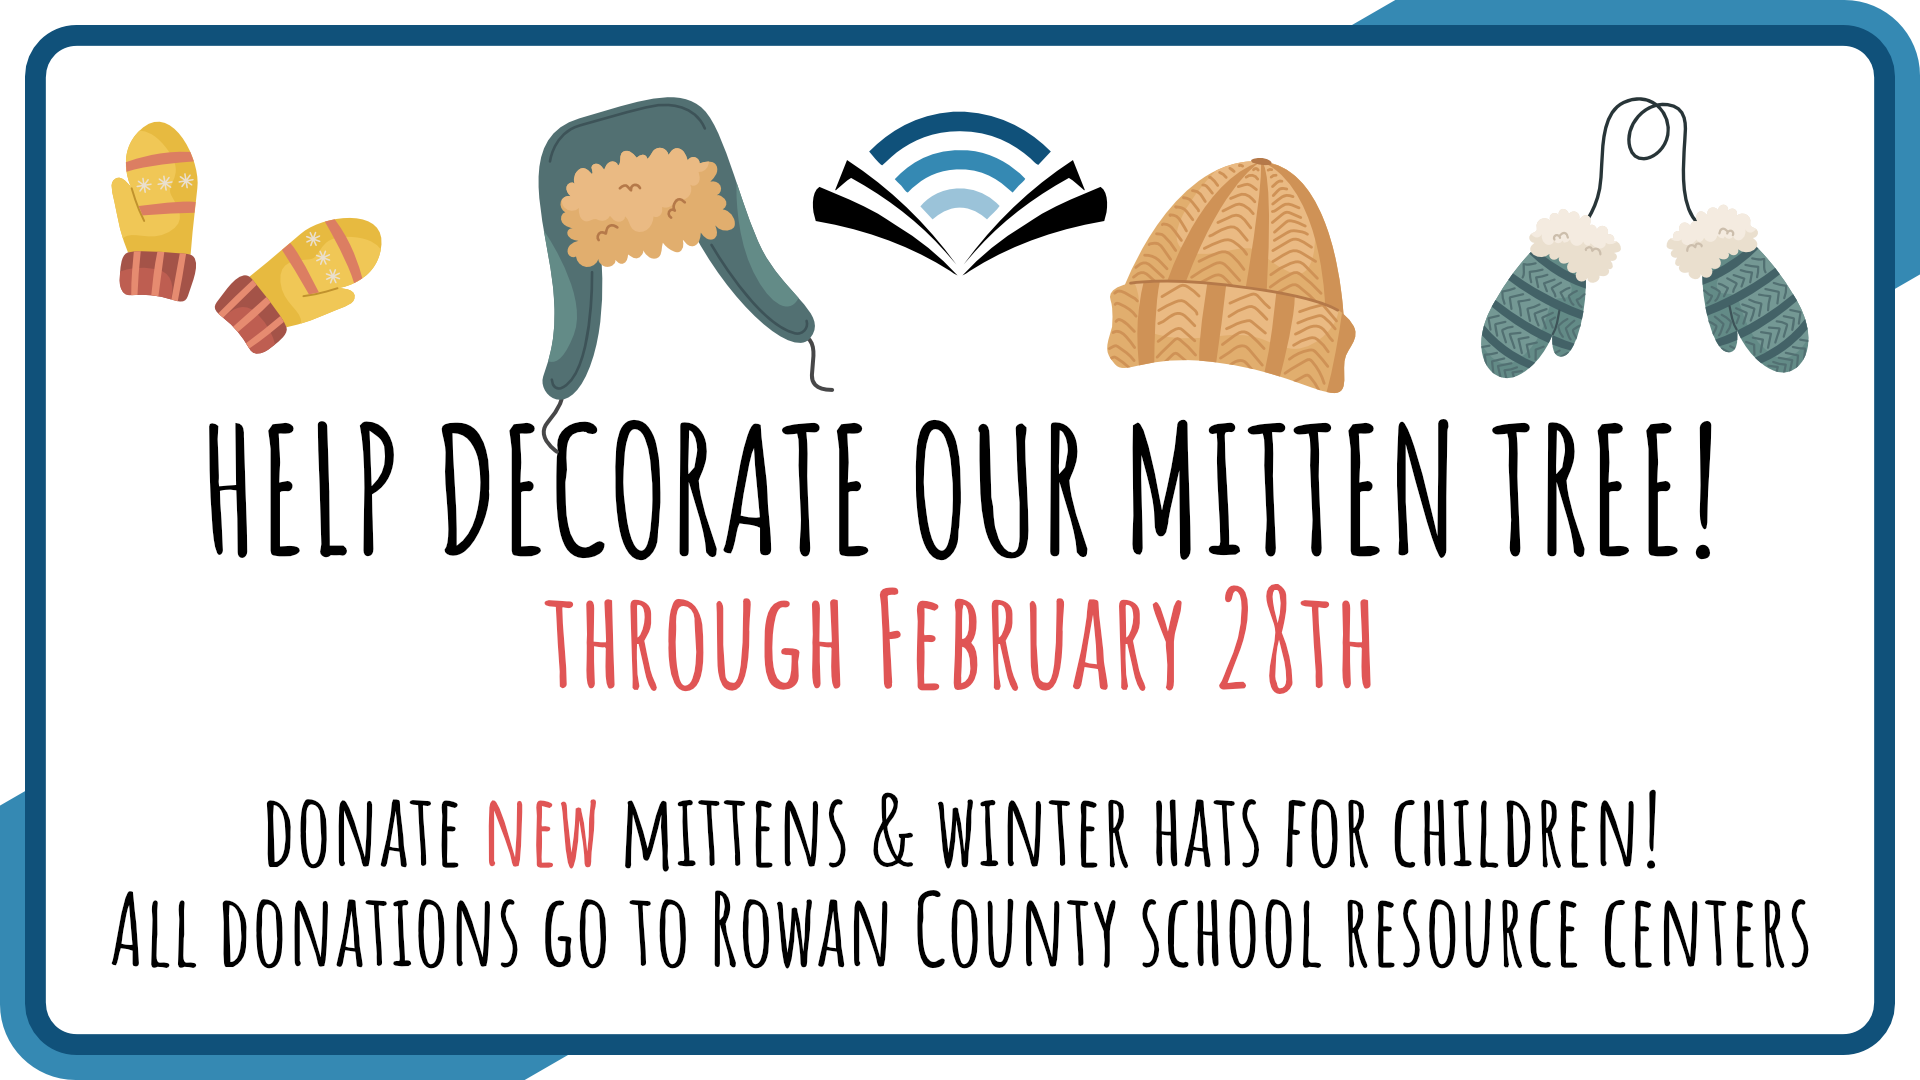 RCPL logo with a row of winter hats and mittens requesting donations of same for children